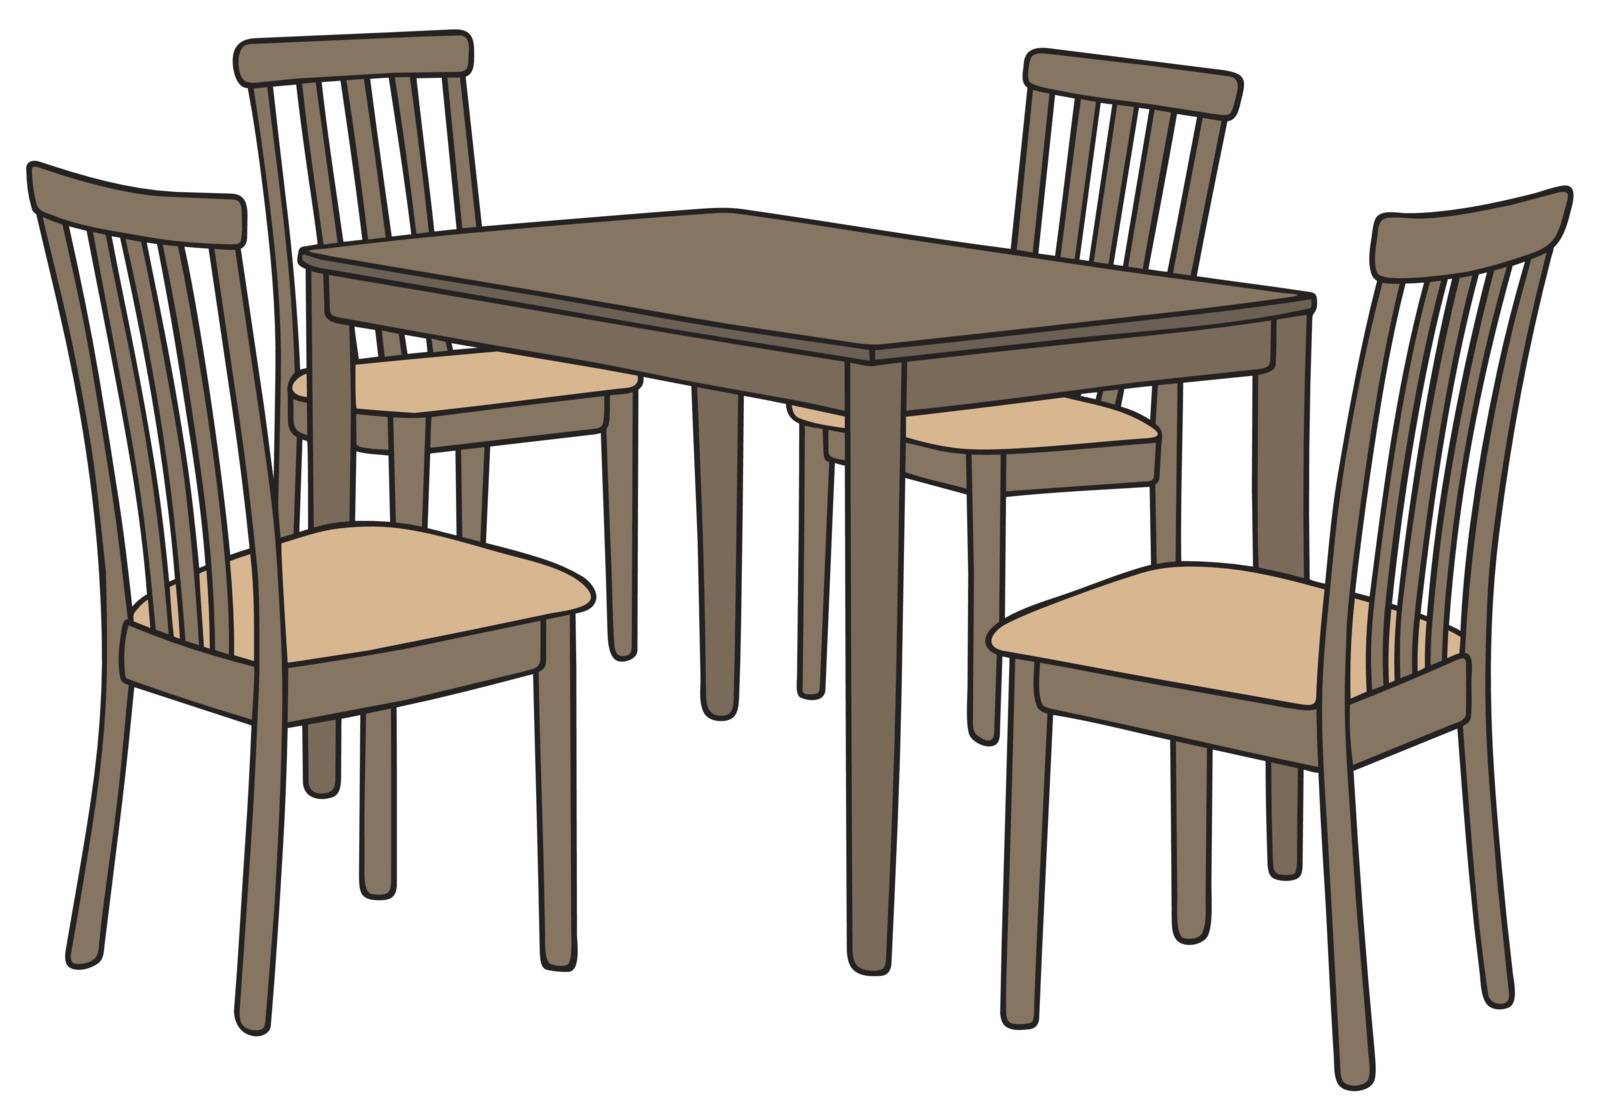 Hand drawing of a dark wooden table and four chairs